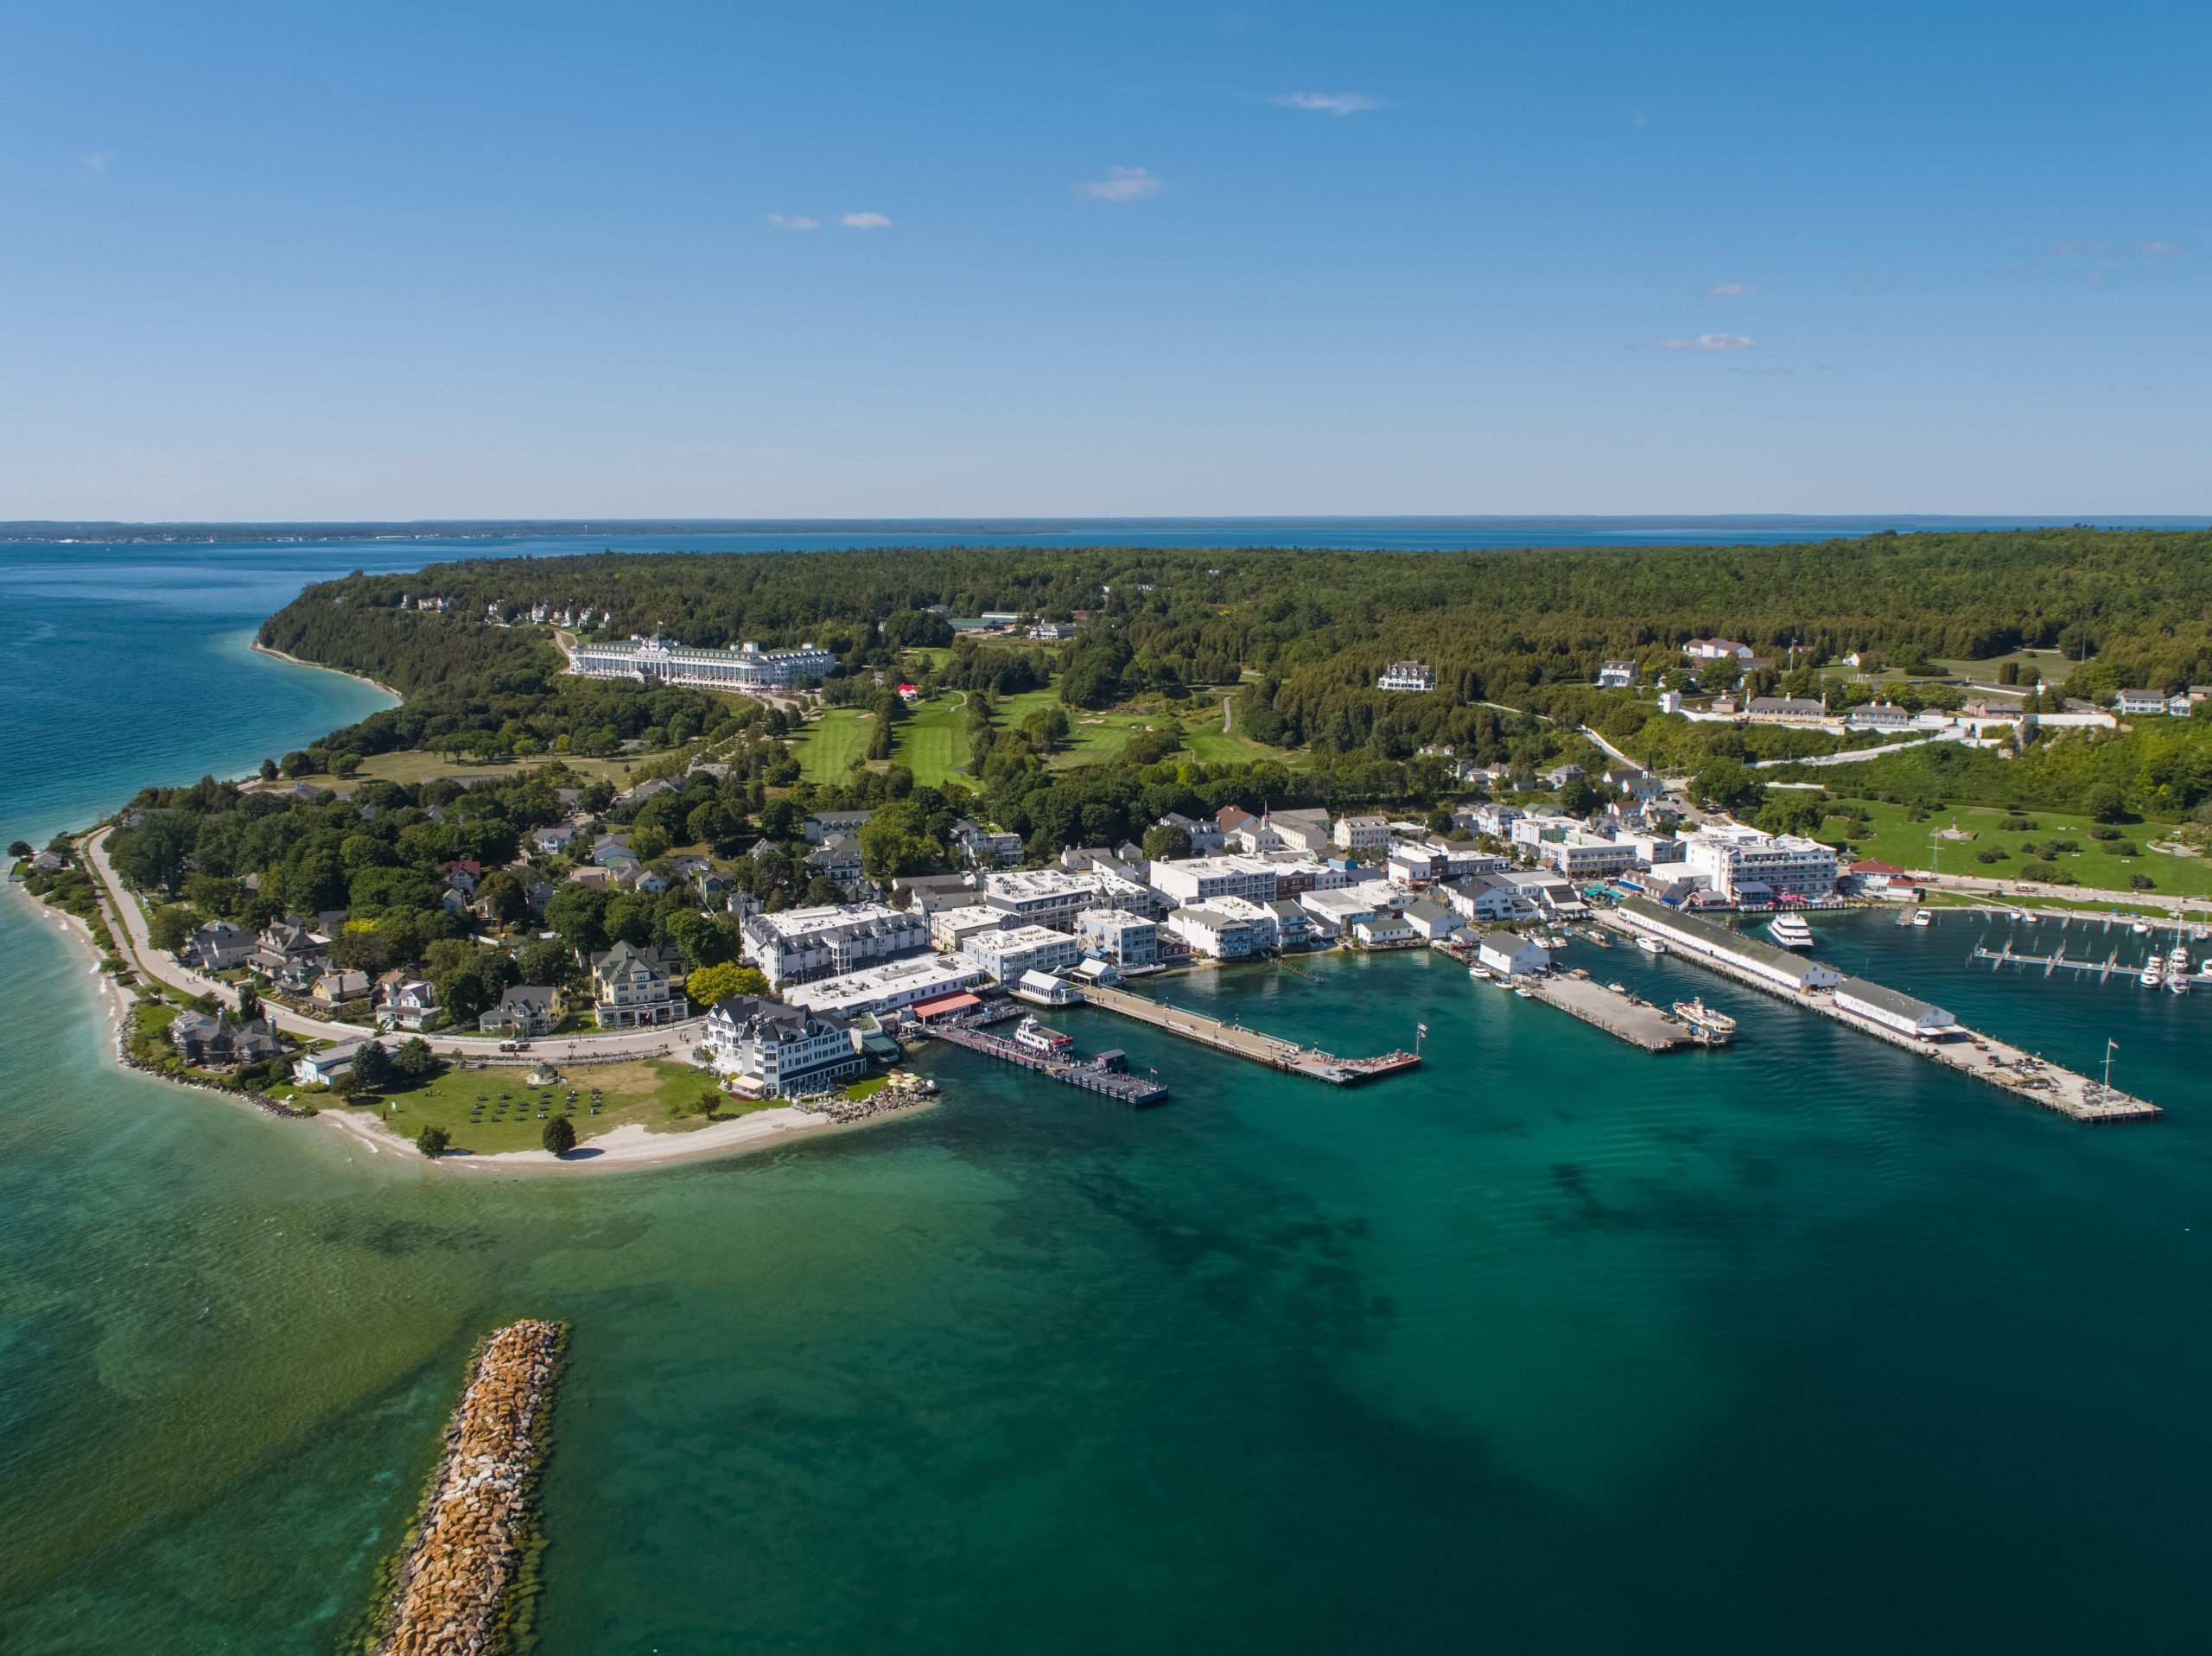 A drone image of Mackinac Island shows the ferry docks, downtown buildings and Grand Hotel and Fort Mackinac on the bluff.